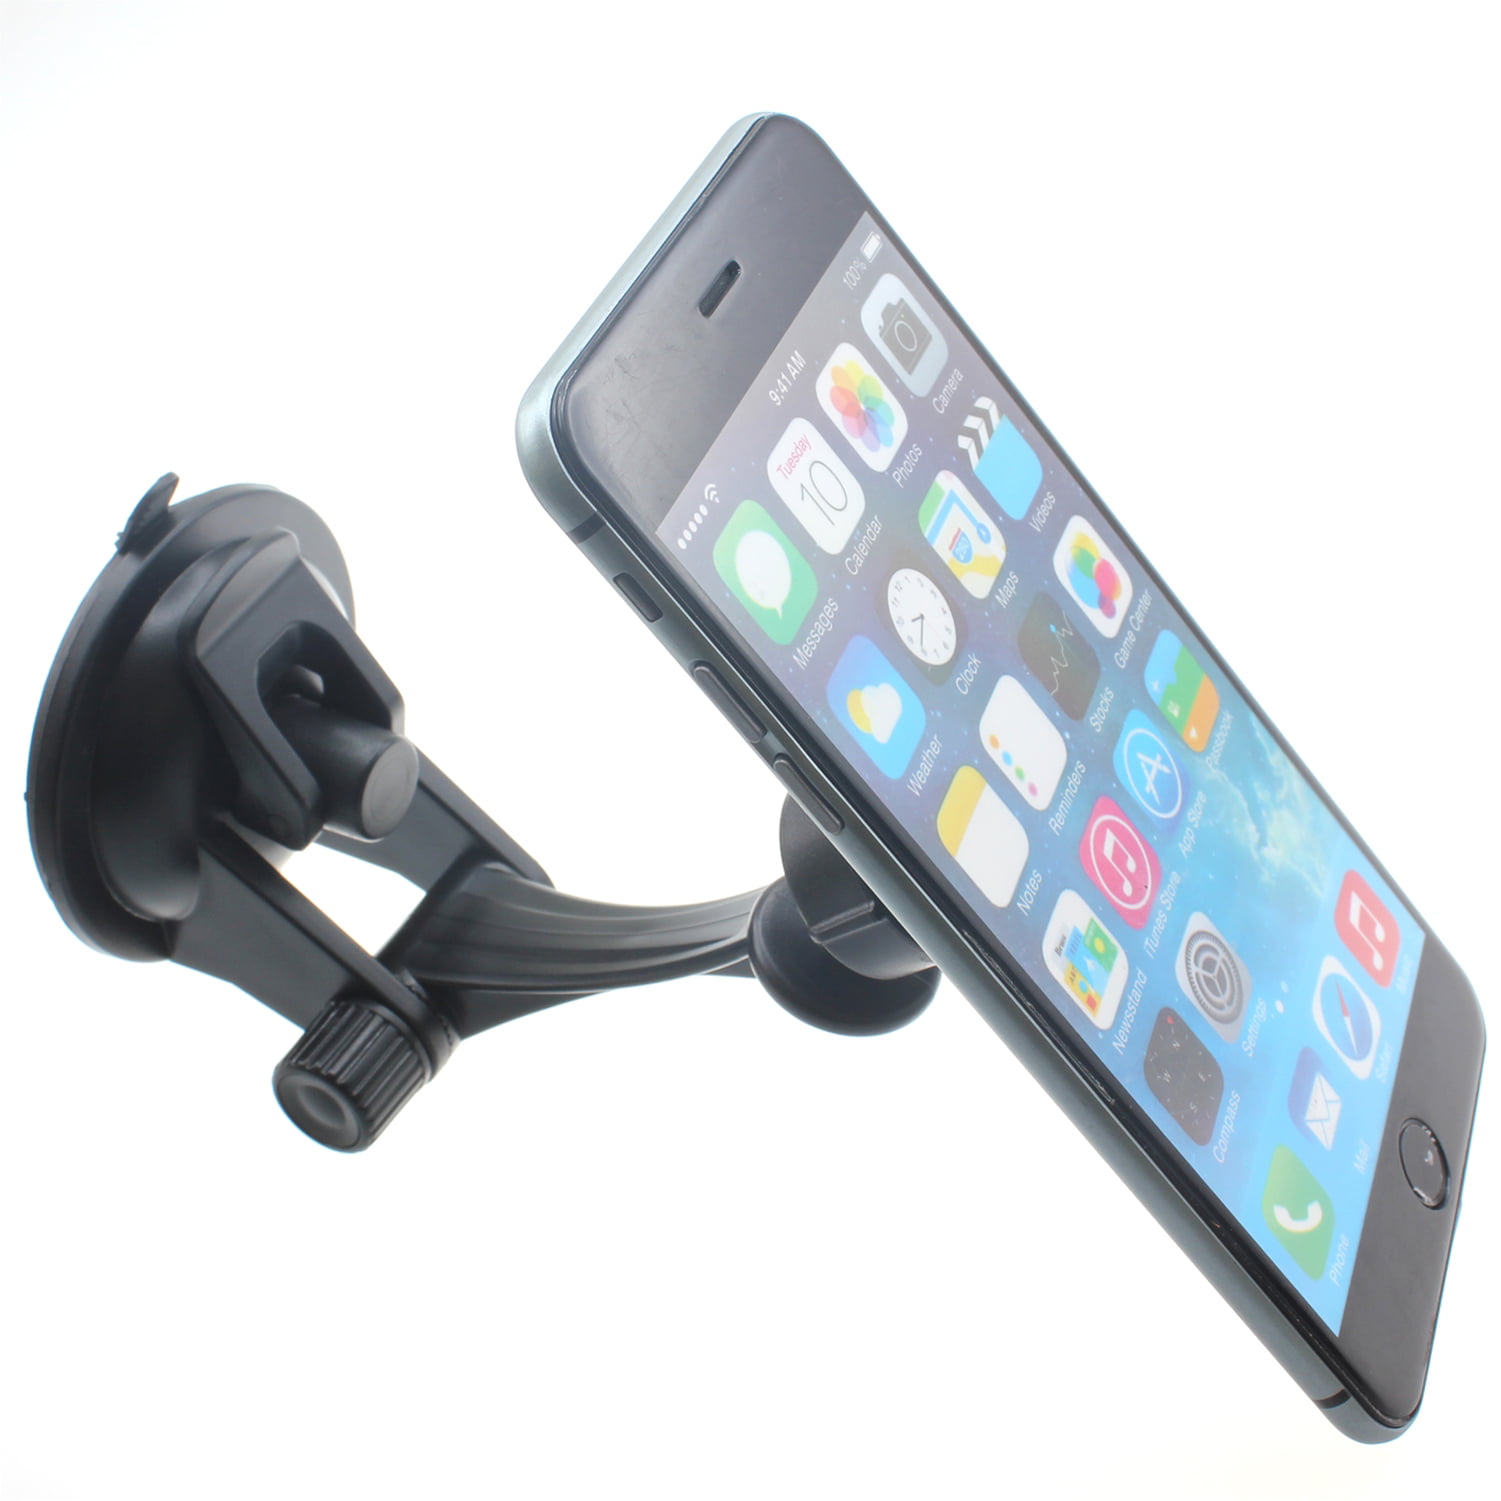 Car Phone Mount Easy Clamp S20/S10 More Ultimate Hands-Free Magnetic Phone Holder for Car Dashboard Windshield Super Suction Compatible with Phone 12/11/11 Pro/8 Plus/8/SE/X/XR/XS/7 